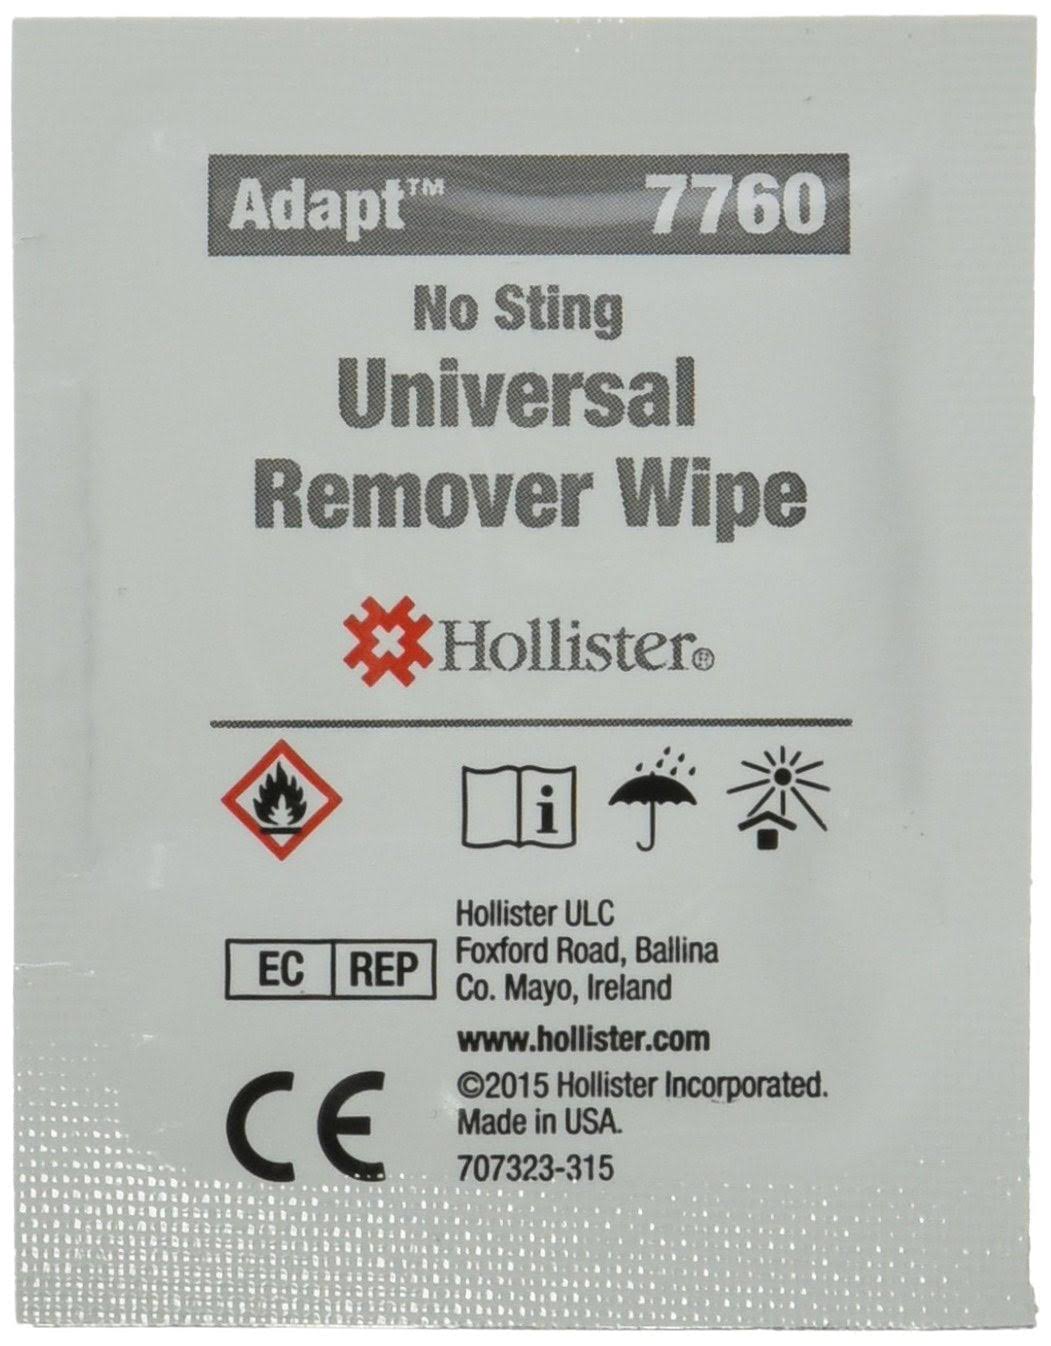 Hollister Adhesive and Barrier Remover Wipes - 50ct